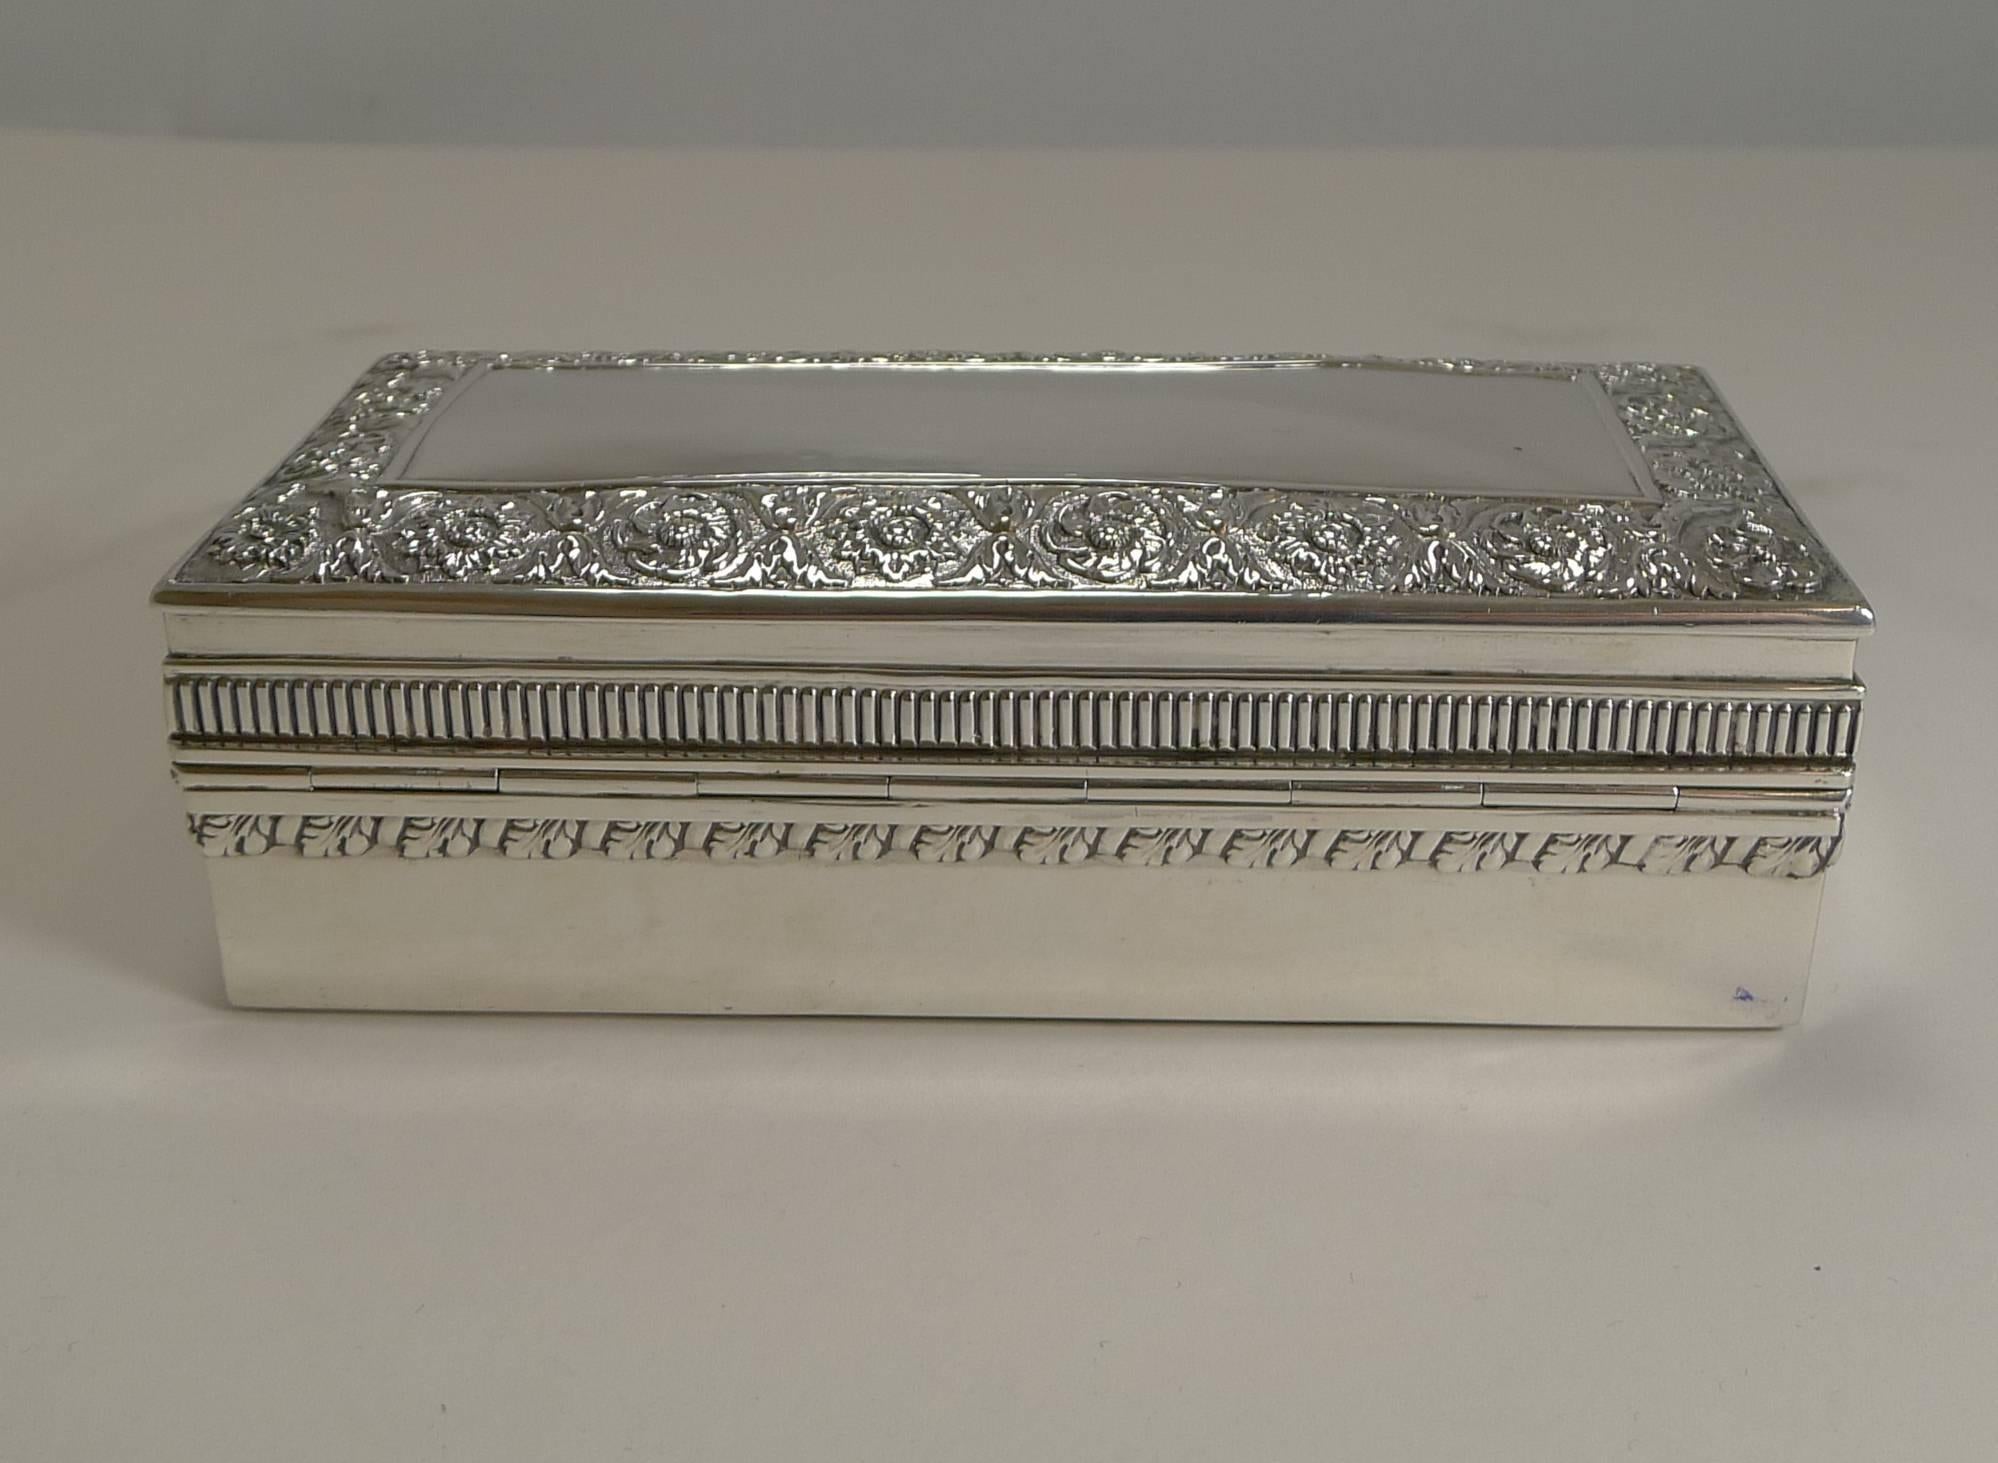 A stunning late Victorian jewellery box, made from English sterling silver fully hallmarked for London 1895, a true Victorian in era. The makers initials are also there for the famous silversmith, William Hutton and Sons.

The domed lid has a